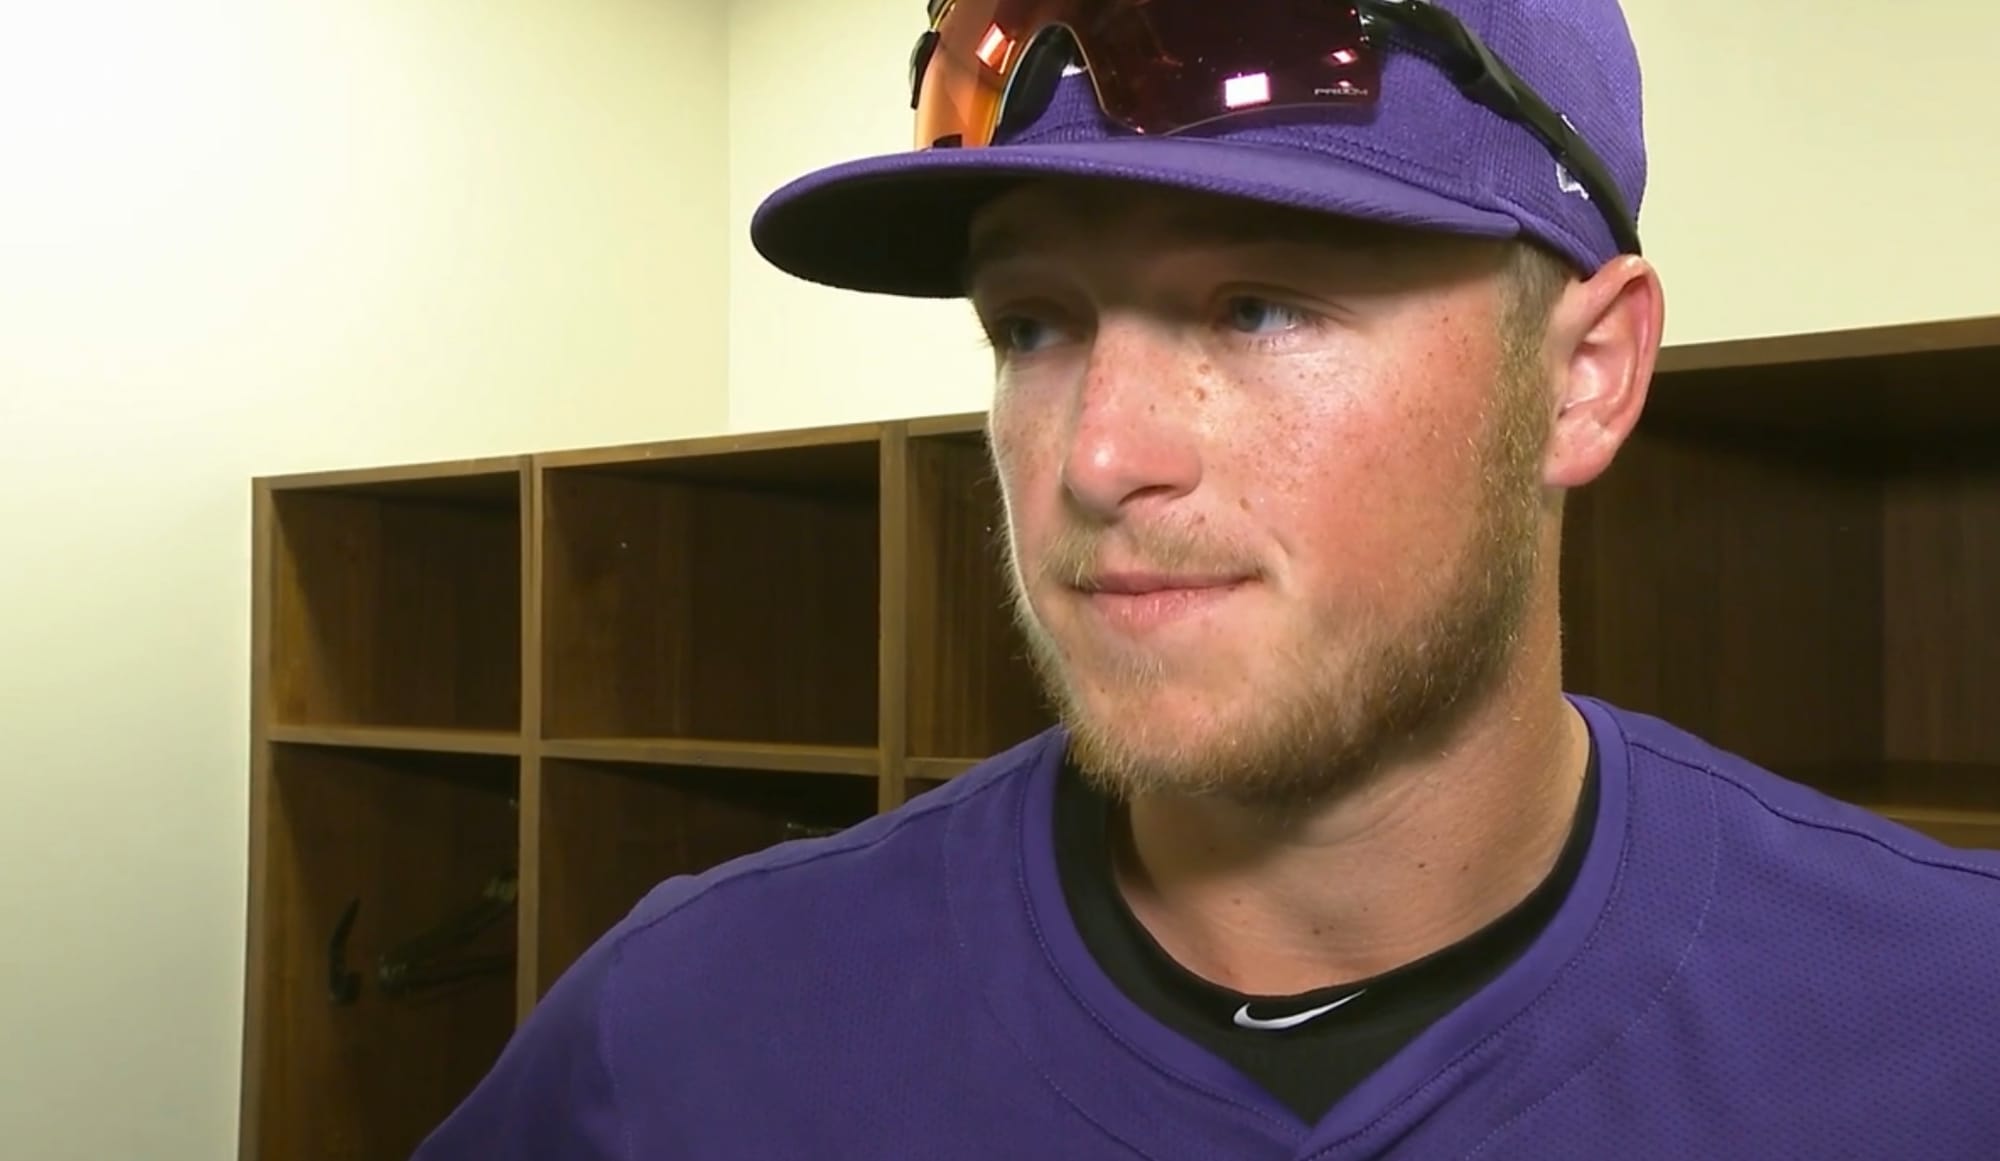 Hunter Goodman meets with the press at spring training. He’s wearing purple with some mirror shades resting on the brim of his hat.